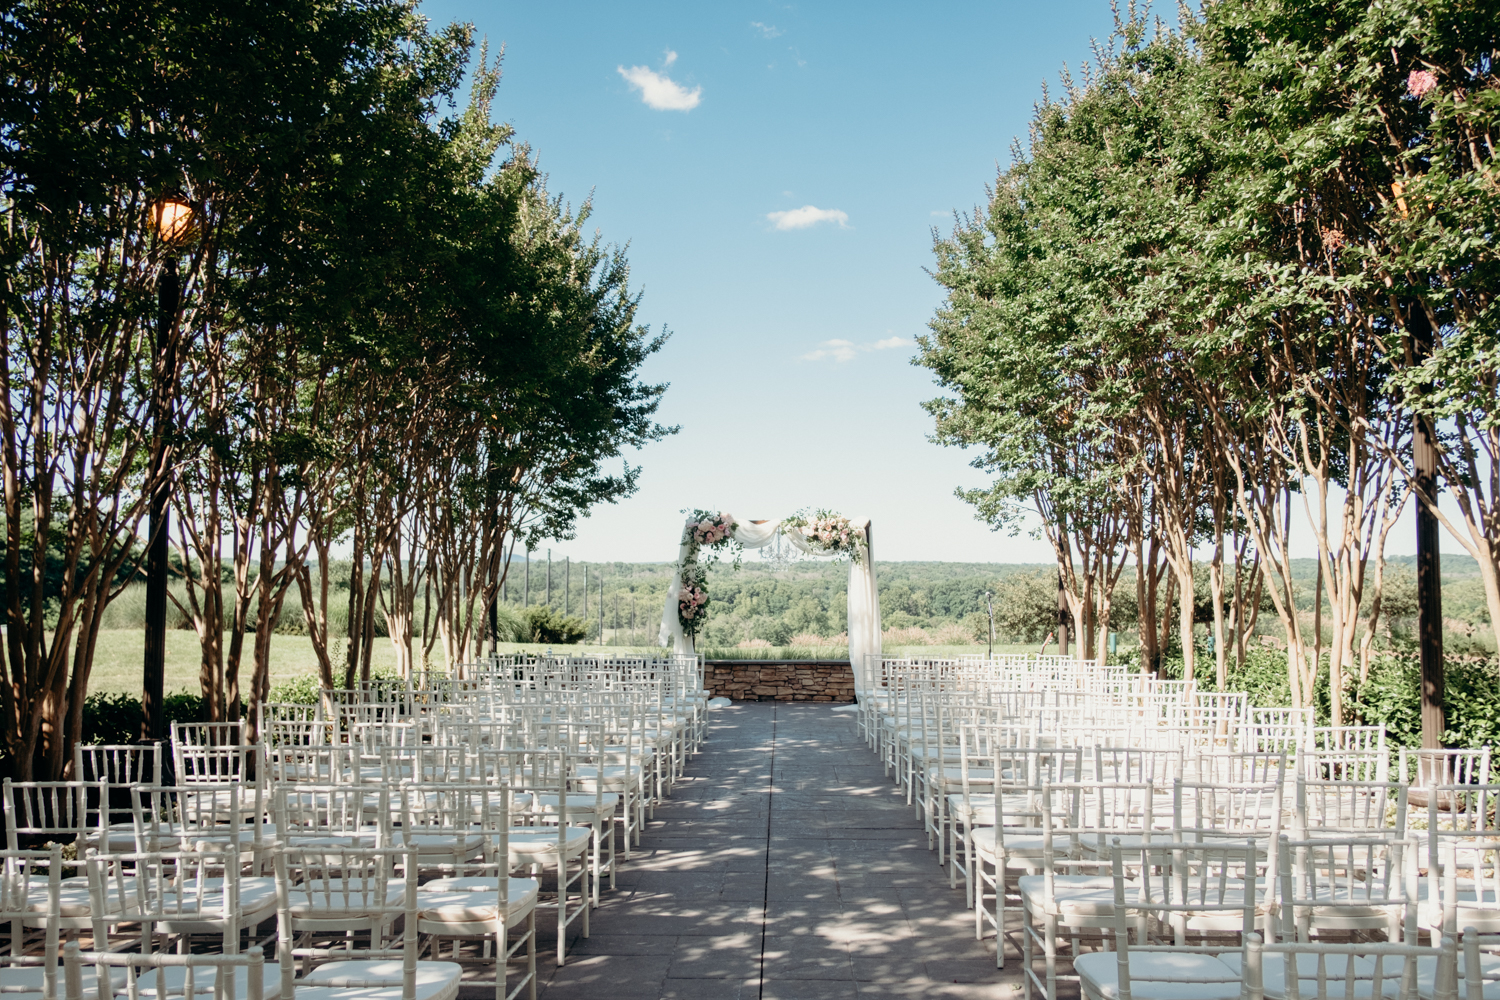 Rows of white chairs with a center aisle leads up to an arbor decorated with while fabric and flowers for a wedding at Lansdowne Resort.